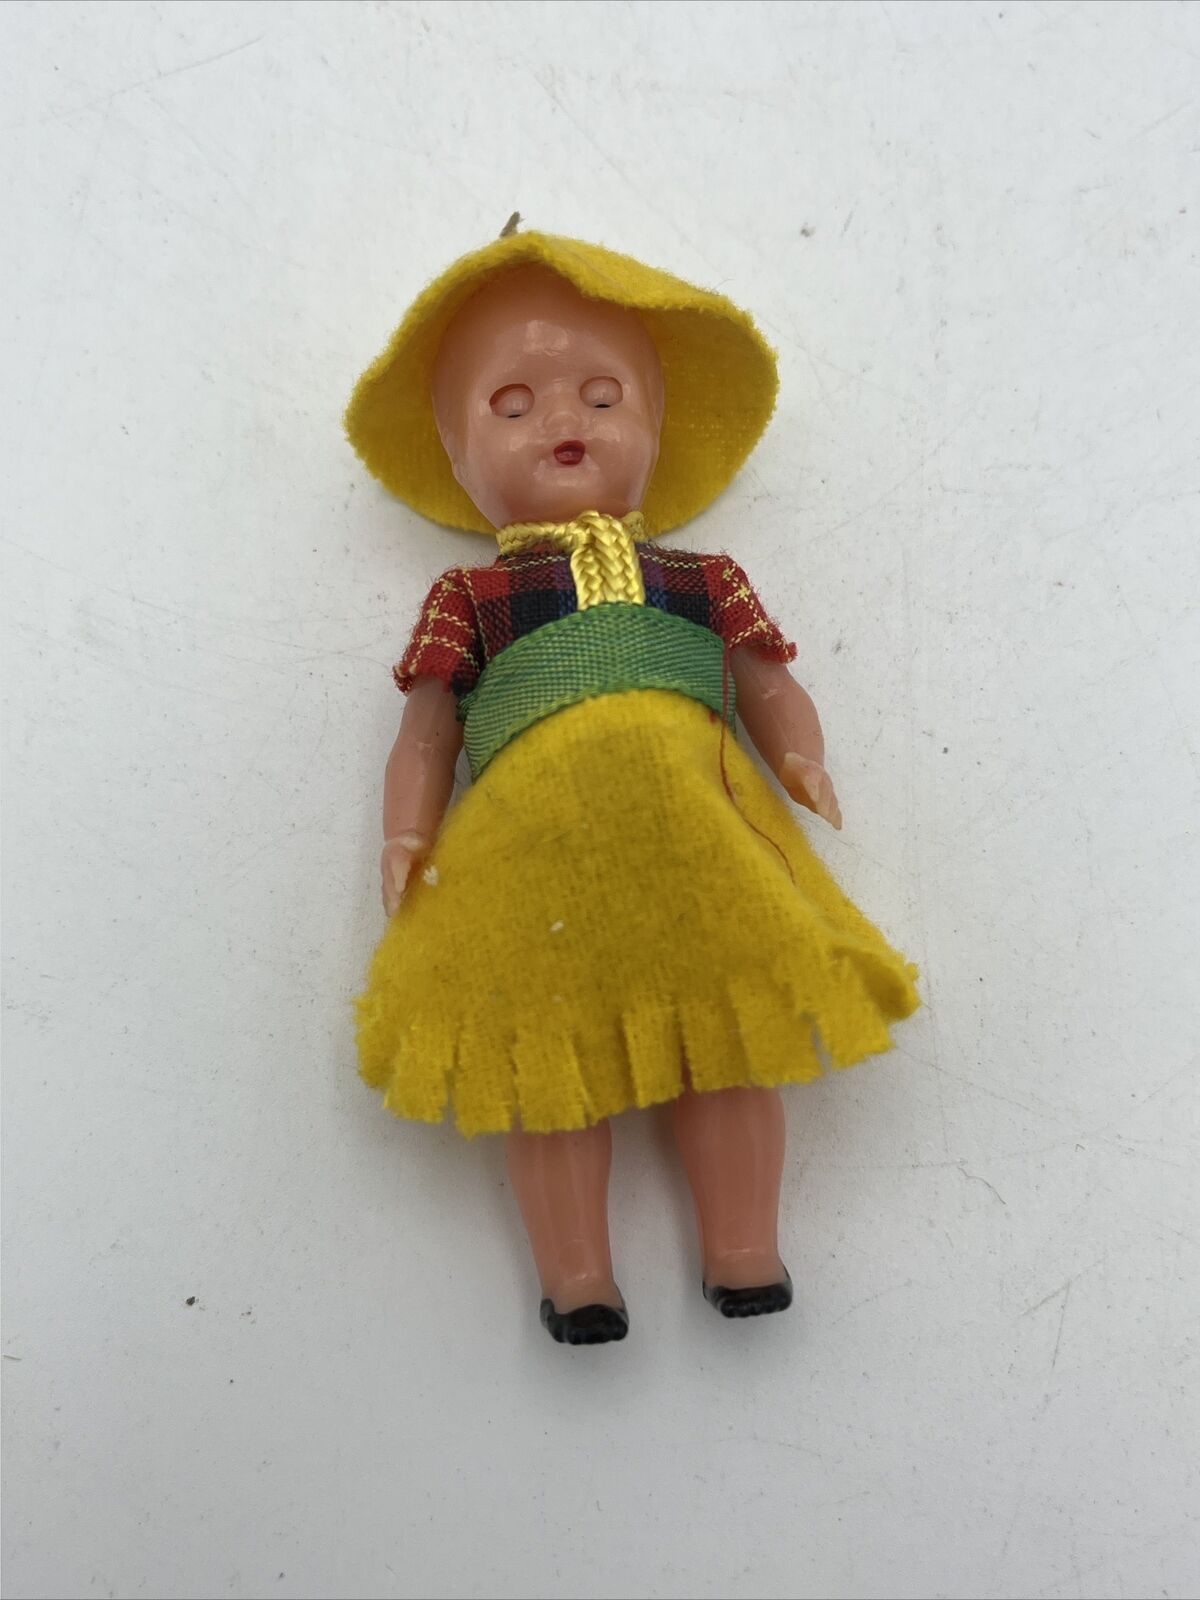 VINTAGE MINIATURE CELLULOID DOLLS MADE IN ITALY FARM GIRL YELLOW DRESS PLASTIC